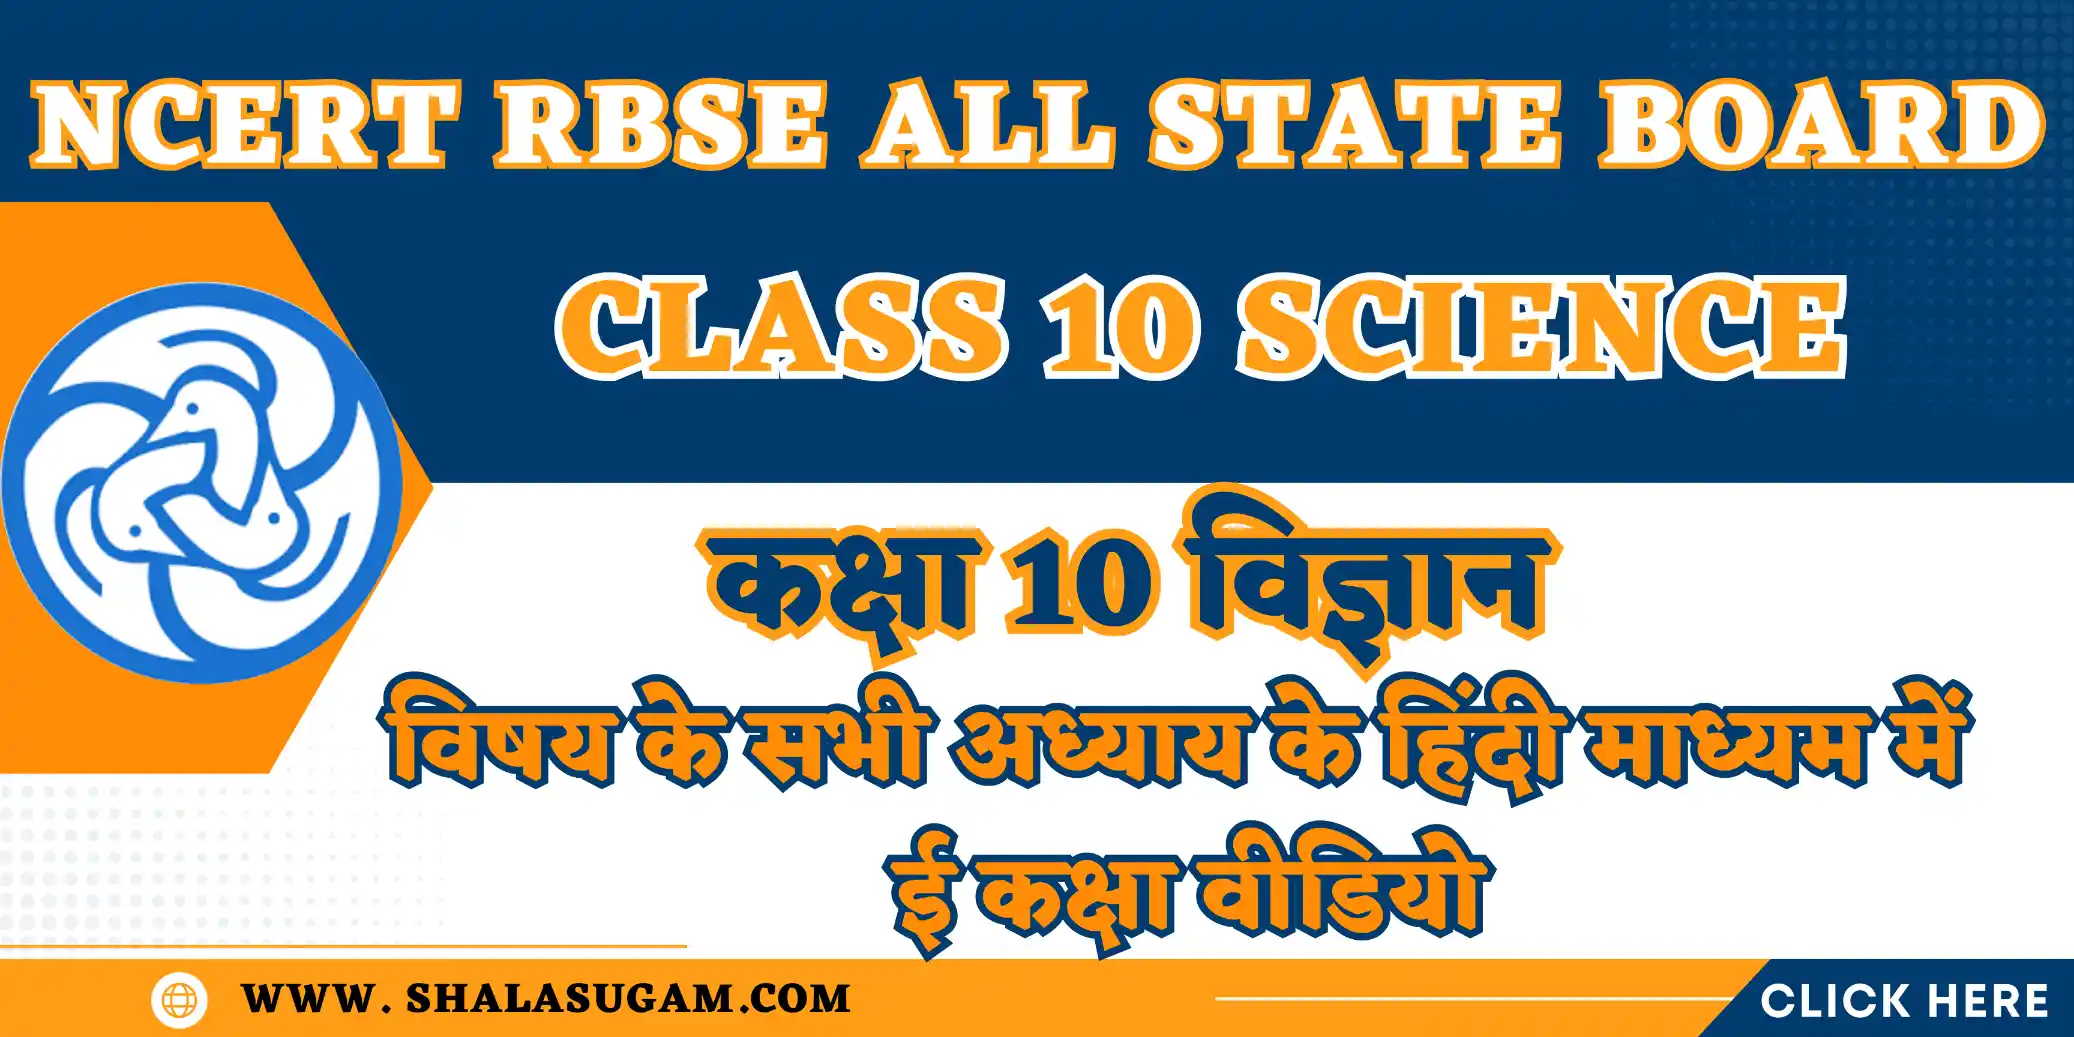 NCERT RBSE CLASS 10 SCIENCE CHAPTERS VIDEOS